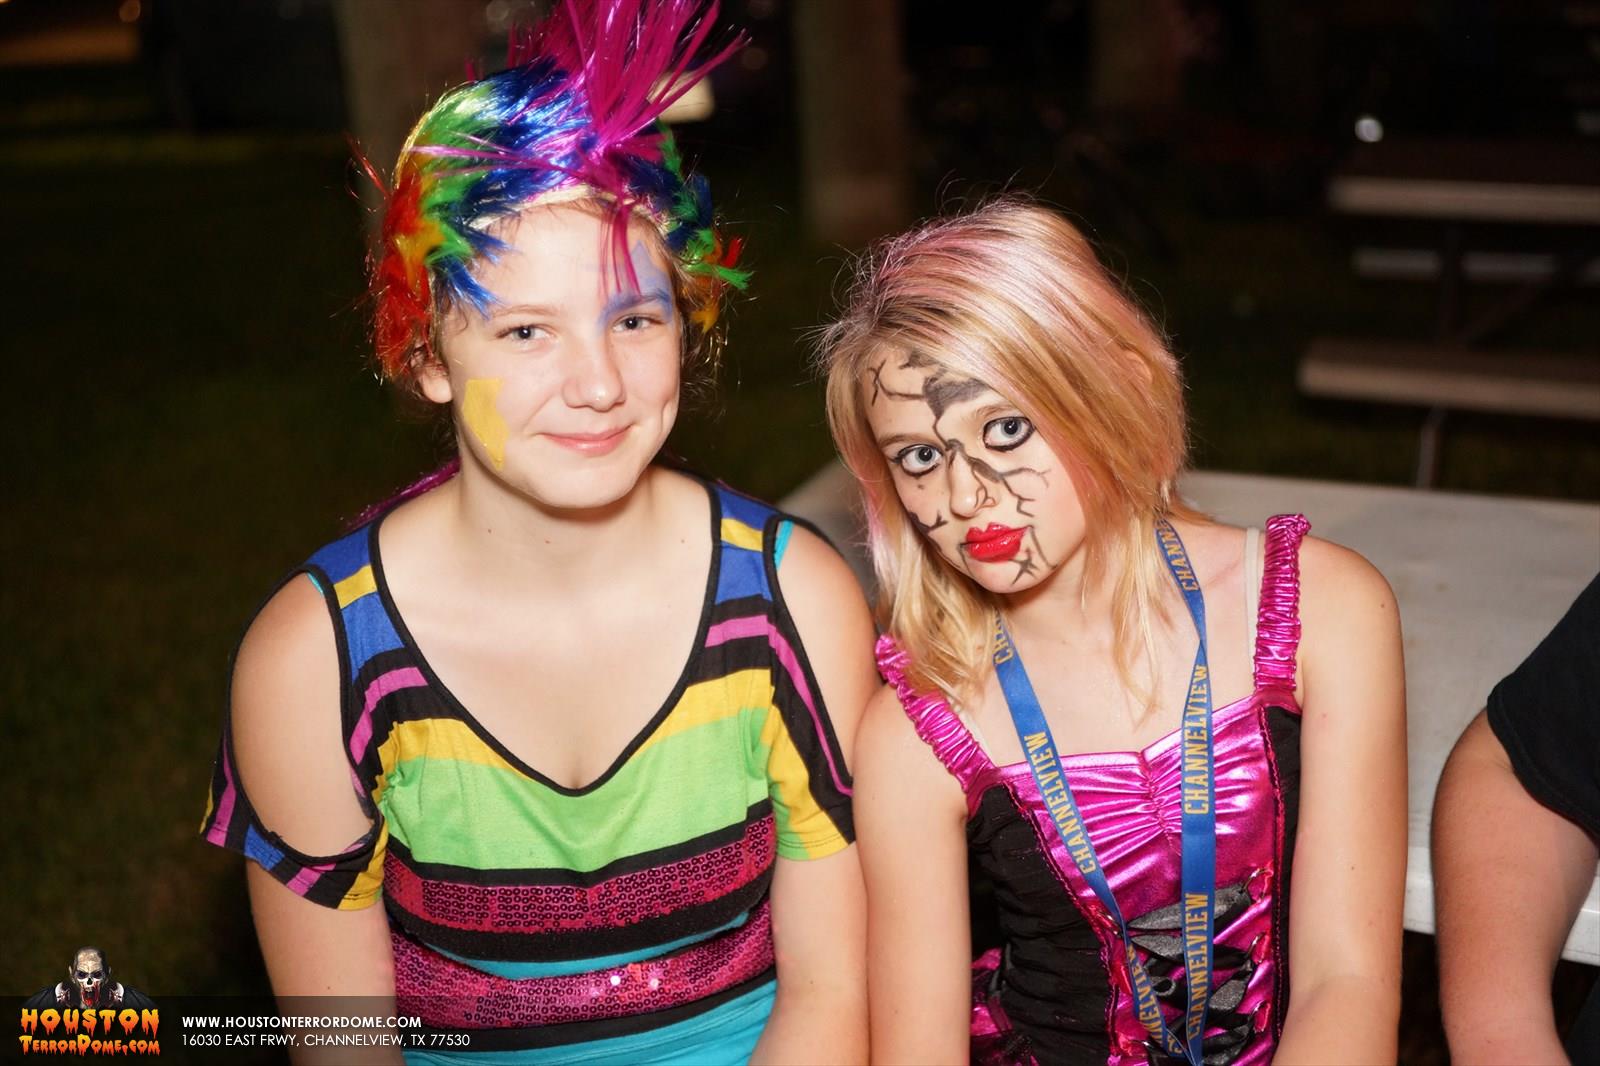 2 girls dressed as Monster High Characters